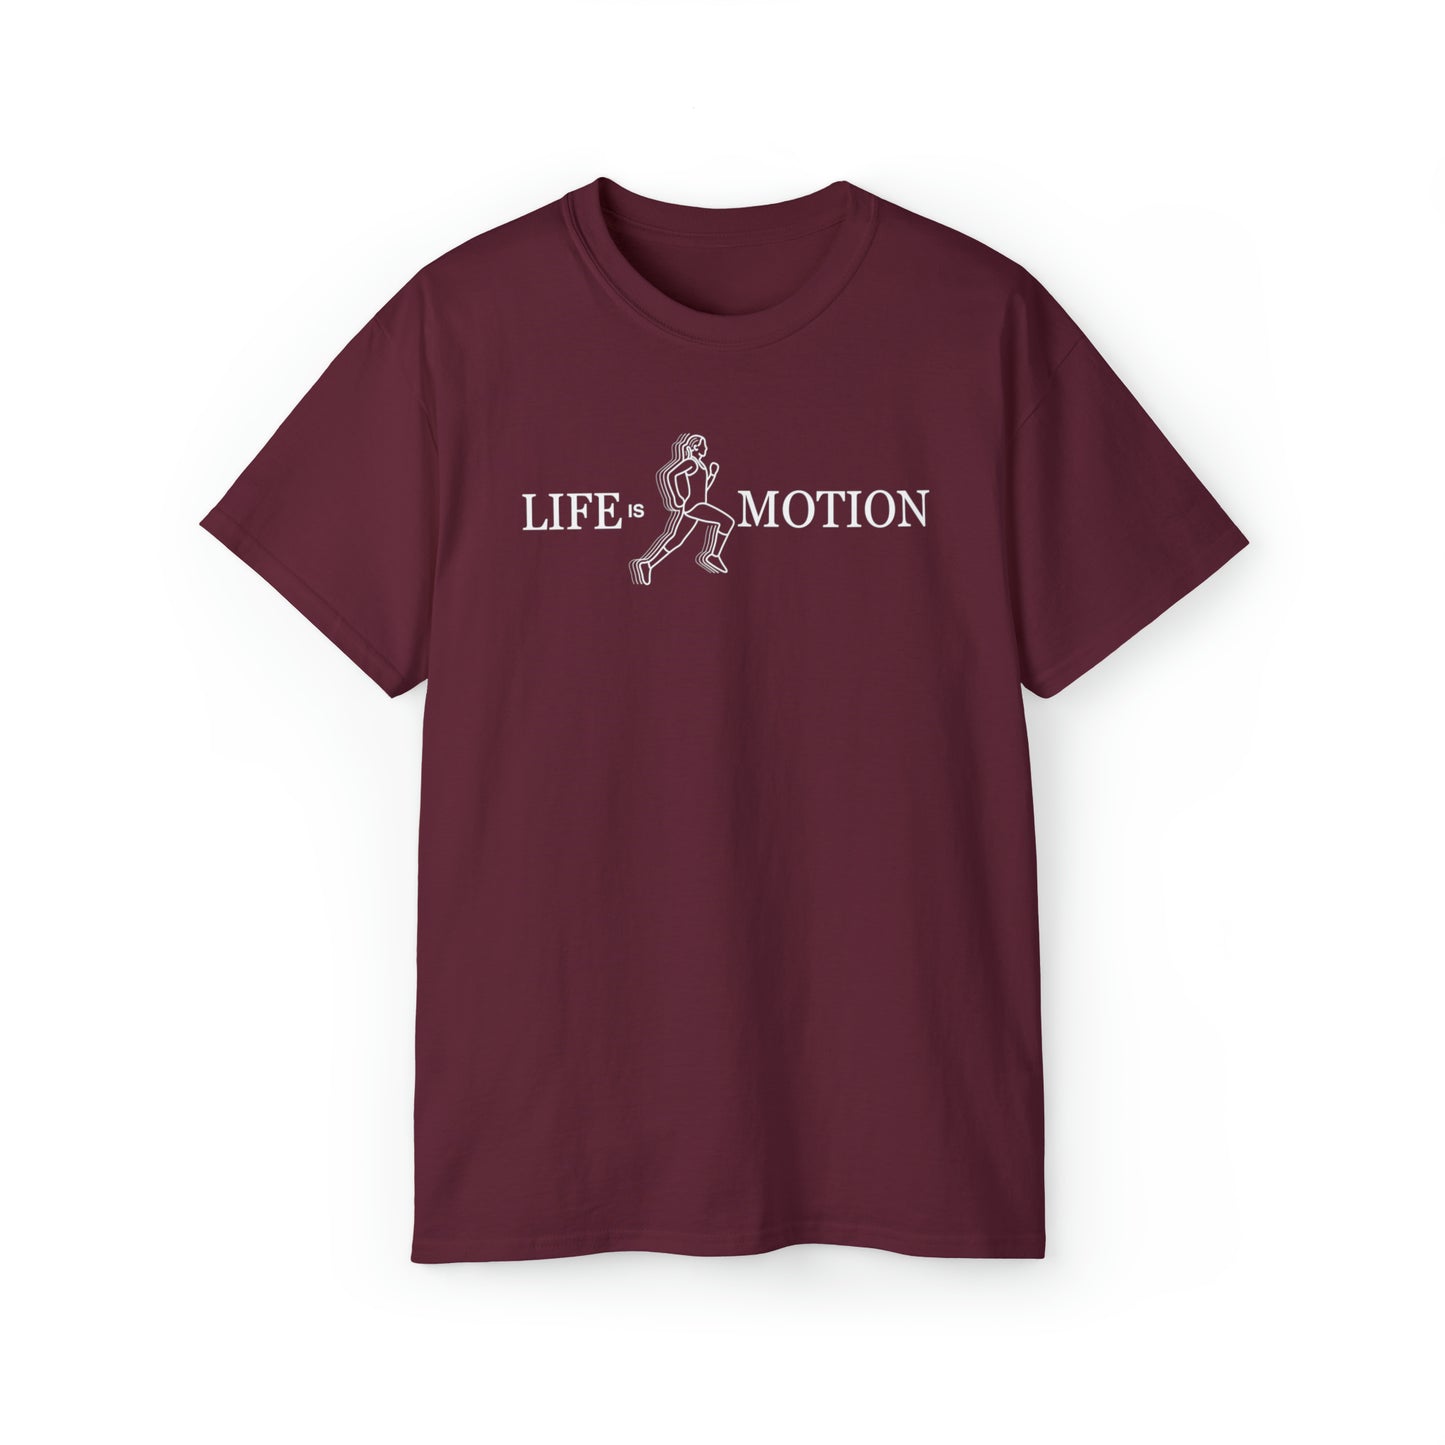 Unisex Ultra Cotton Tee - Life is motion